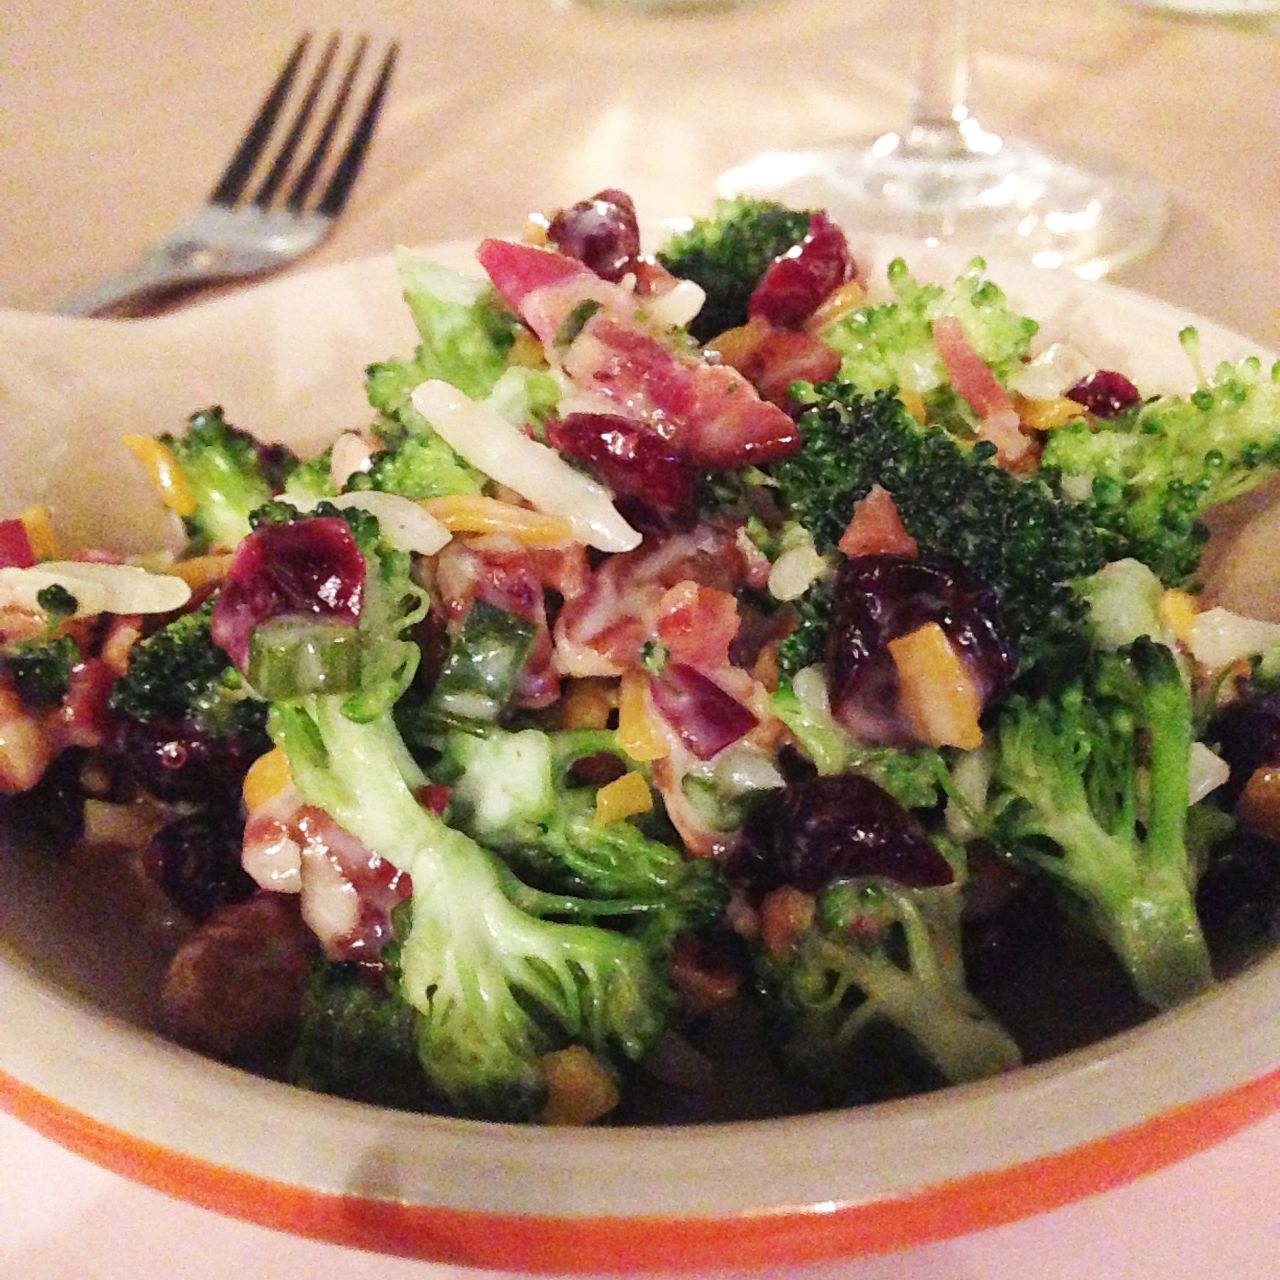 Pat Martin as guest chef at City Grit Culinary Salon, New York: "Church salad" of broccoli, house-cured bacon, mayonnaise, dried cranberries, cheese and magic